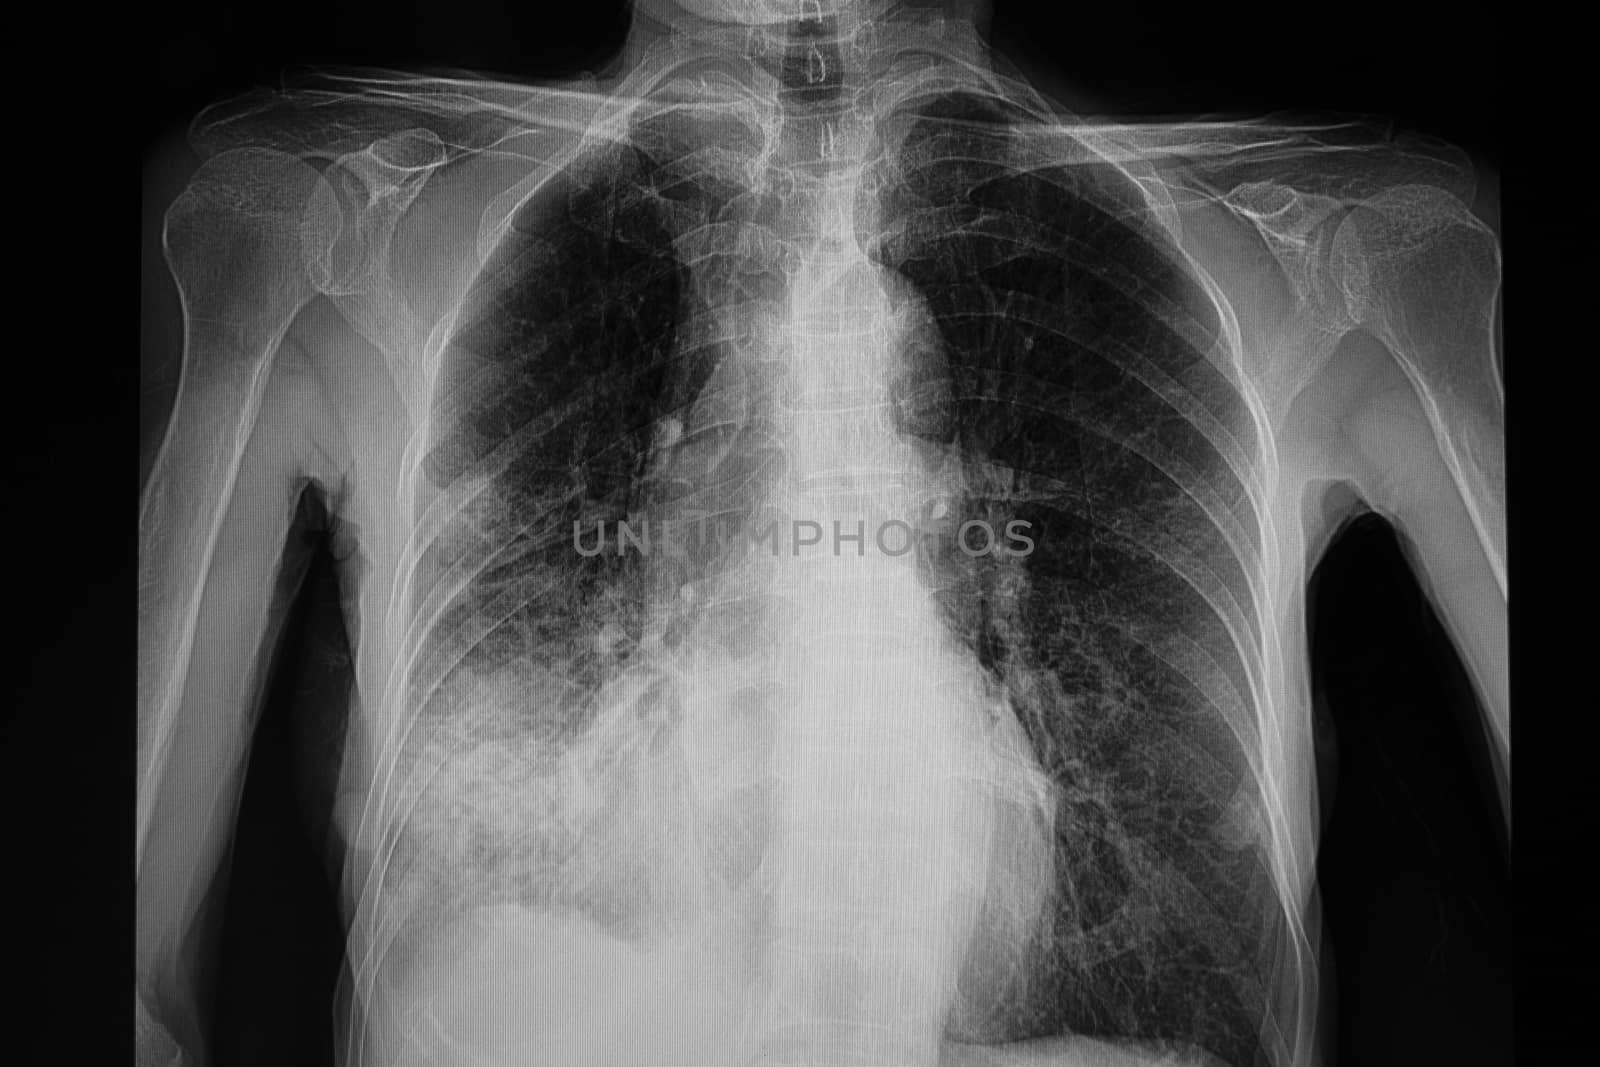 pneumonia right lower lung by Nawoot